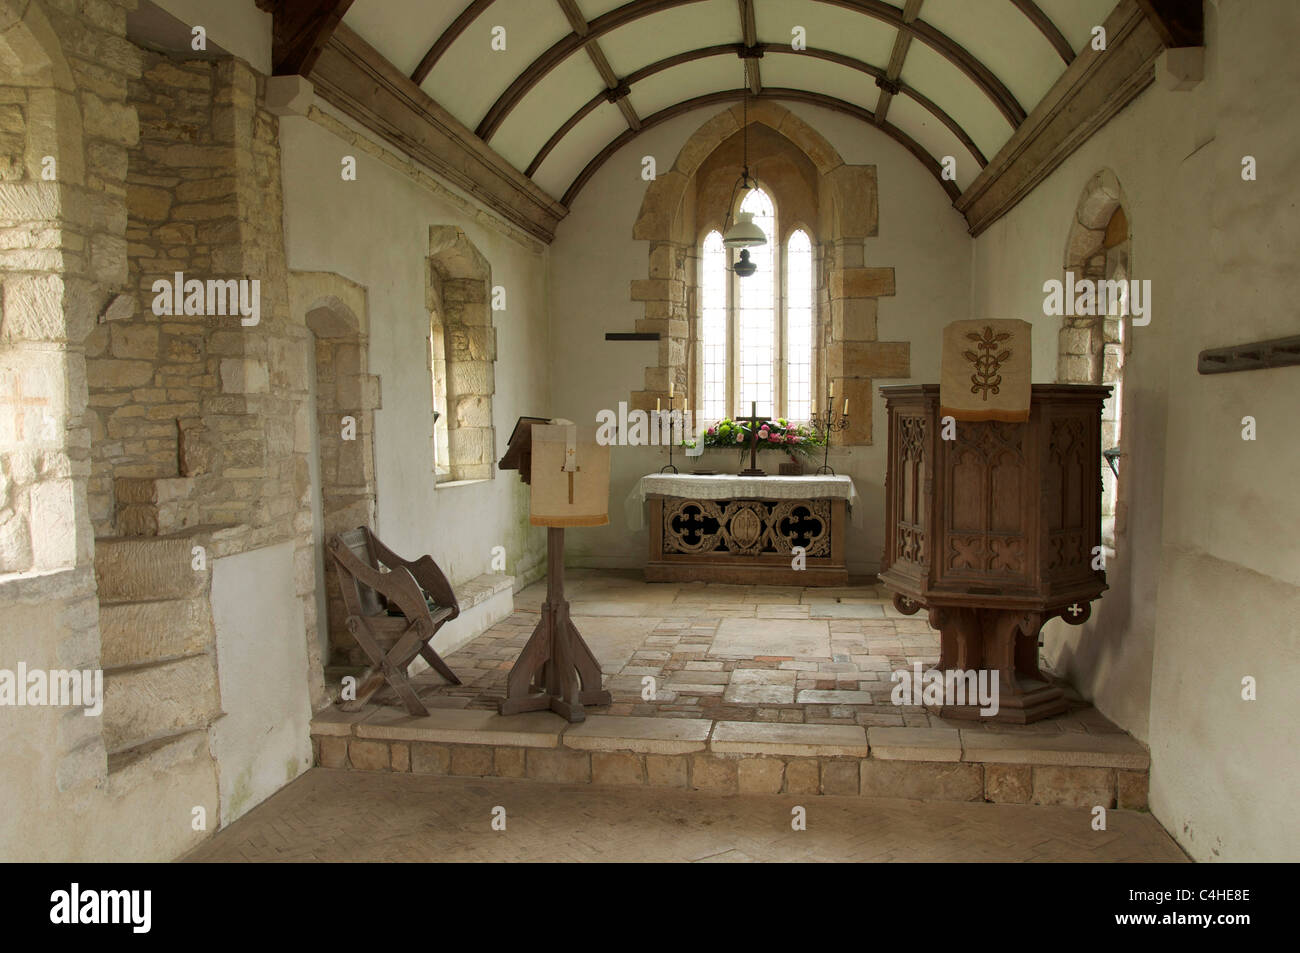 The chancel of the redundant 12th century church at Whitcombe near Dorchester. The poet William Barnes was curate here from 1847 to 1852. Dorset, UK. Stock Photo